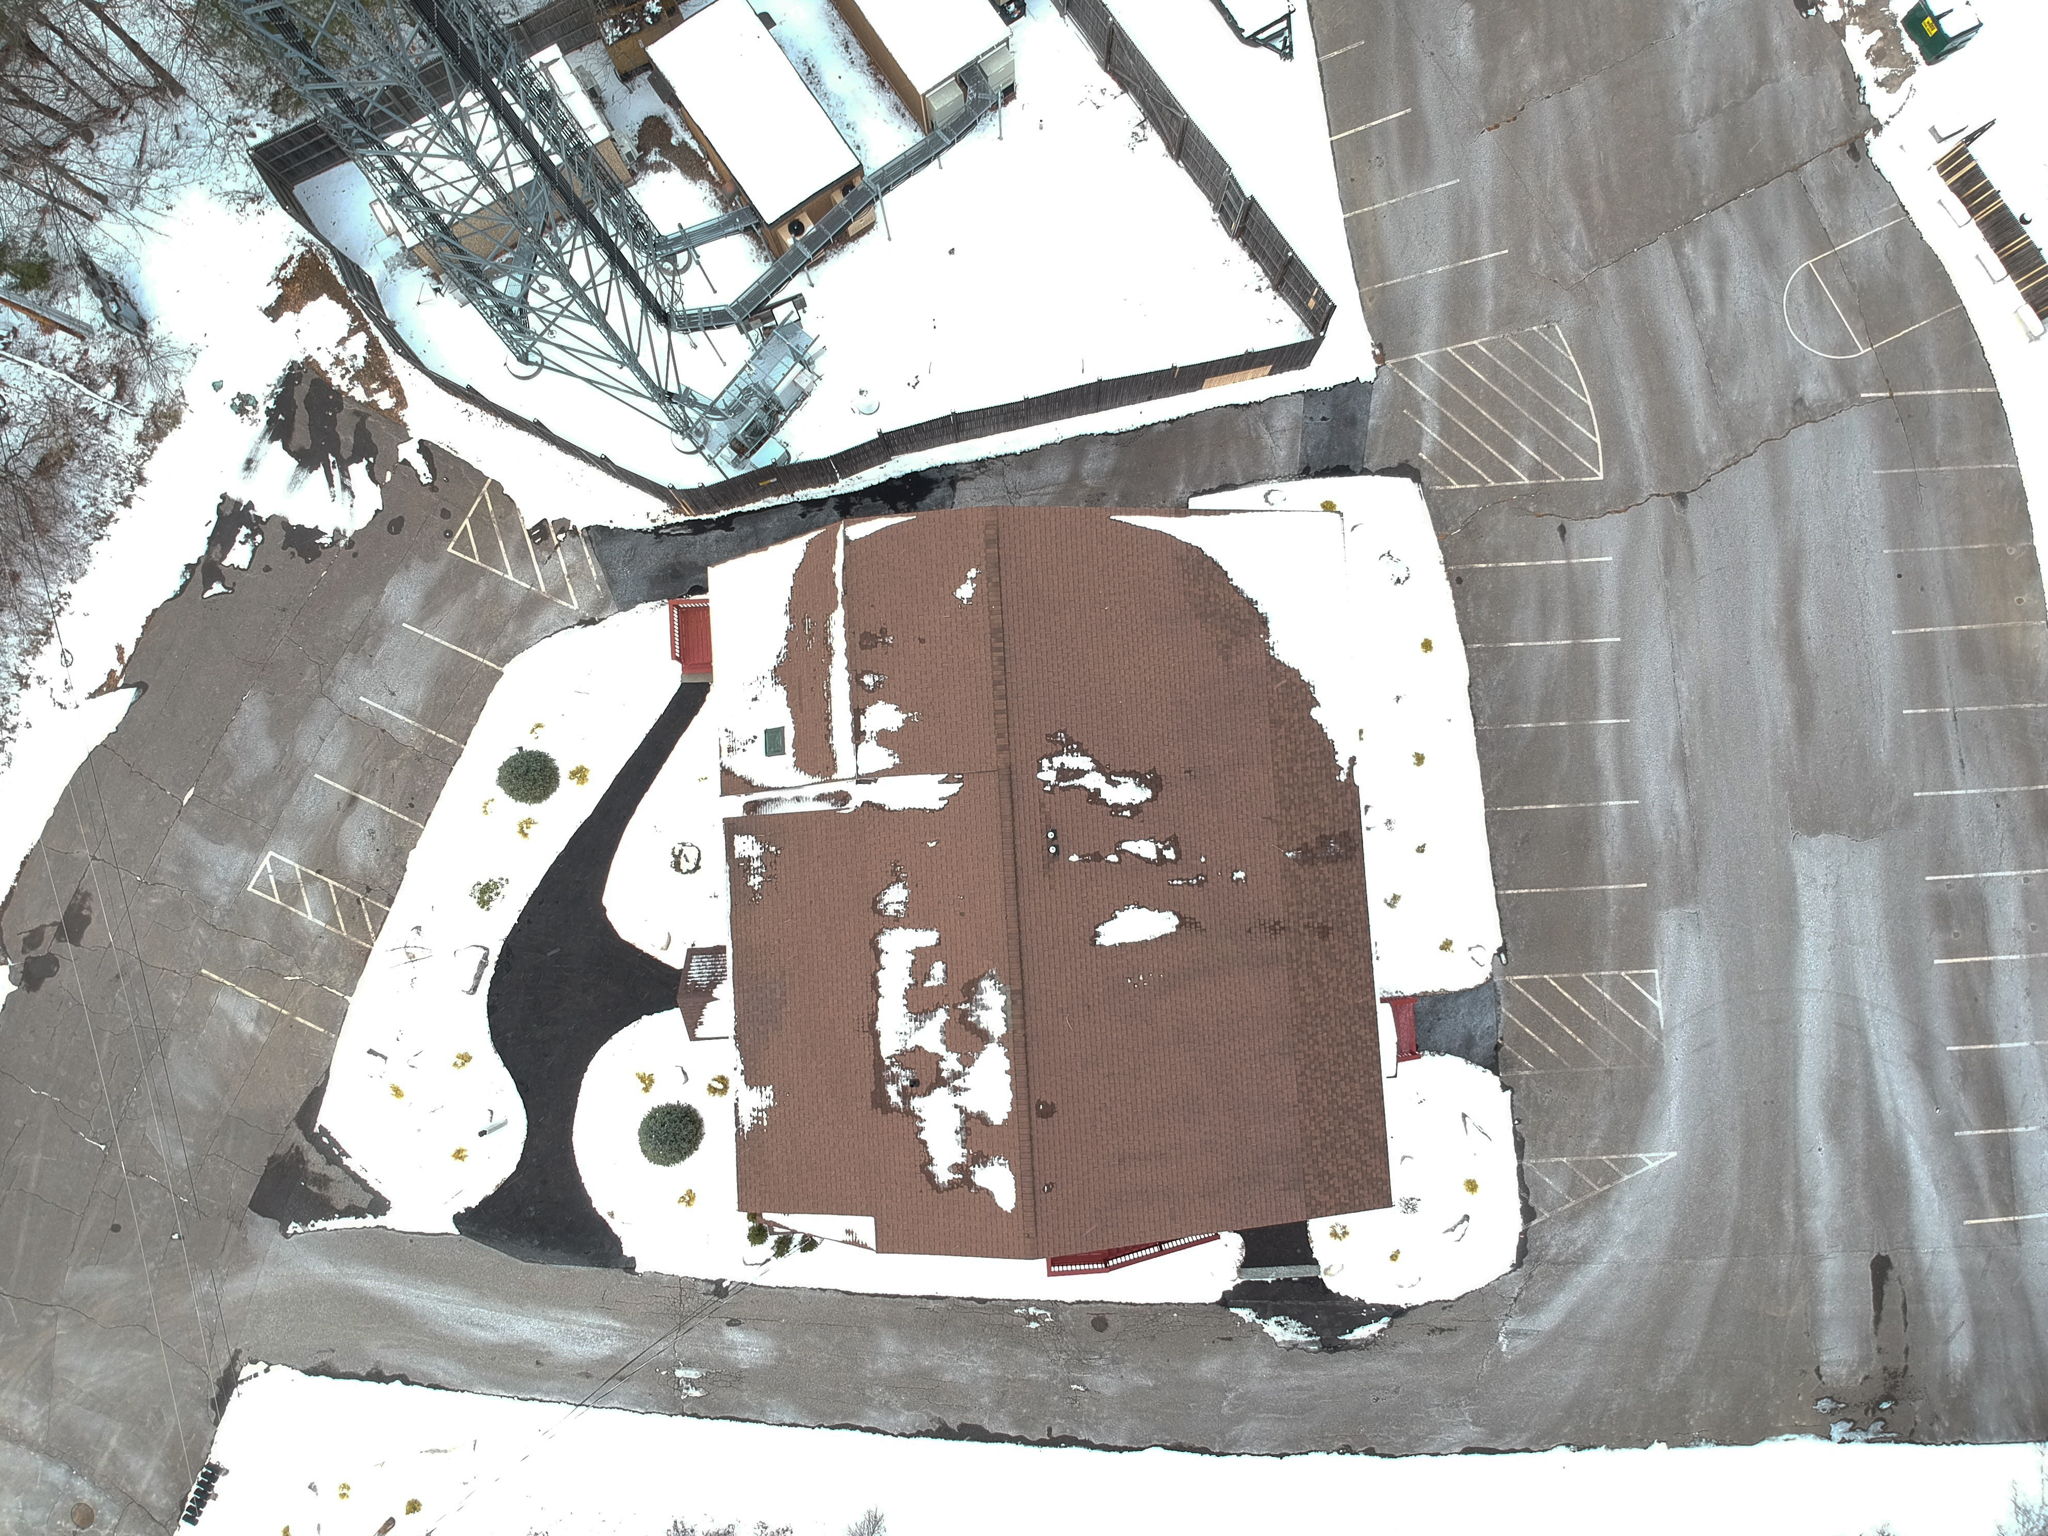 Aerial Downward View of Building